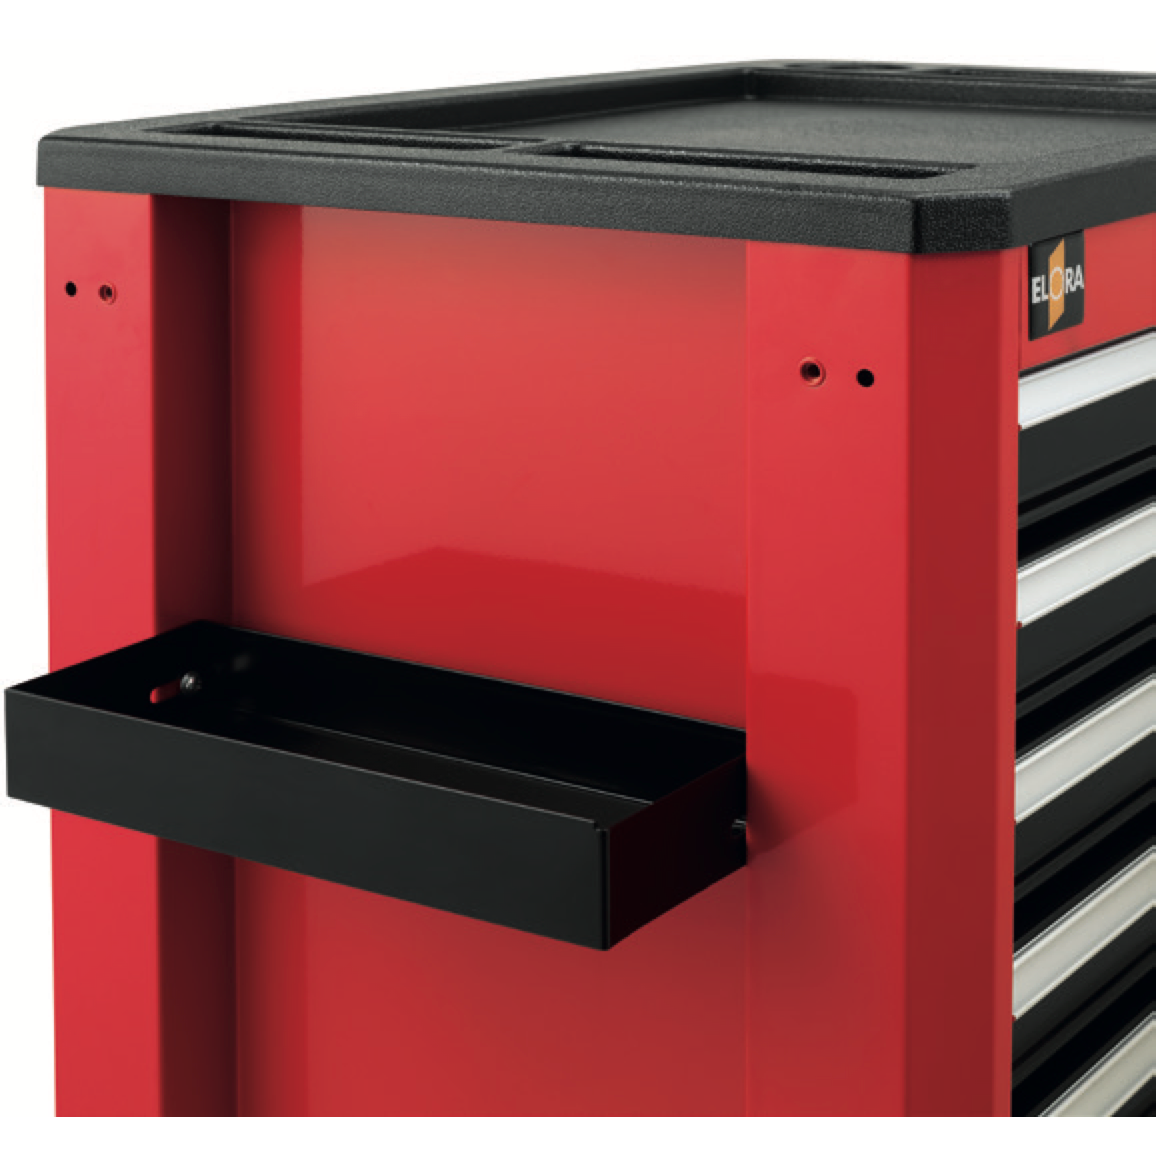 ELORA 1210-ES Foldable Tray Accessories Roller Tool Cabinet - Premium Roller Tool Cabinet from ELORA - Shop now at Yew Aik.